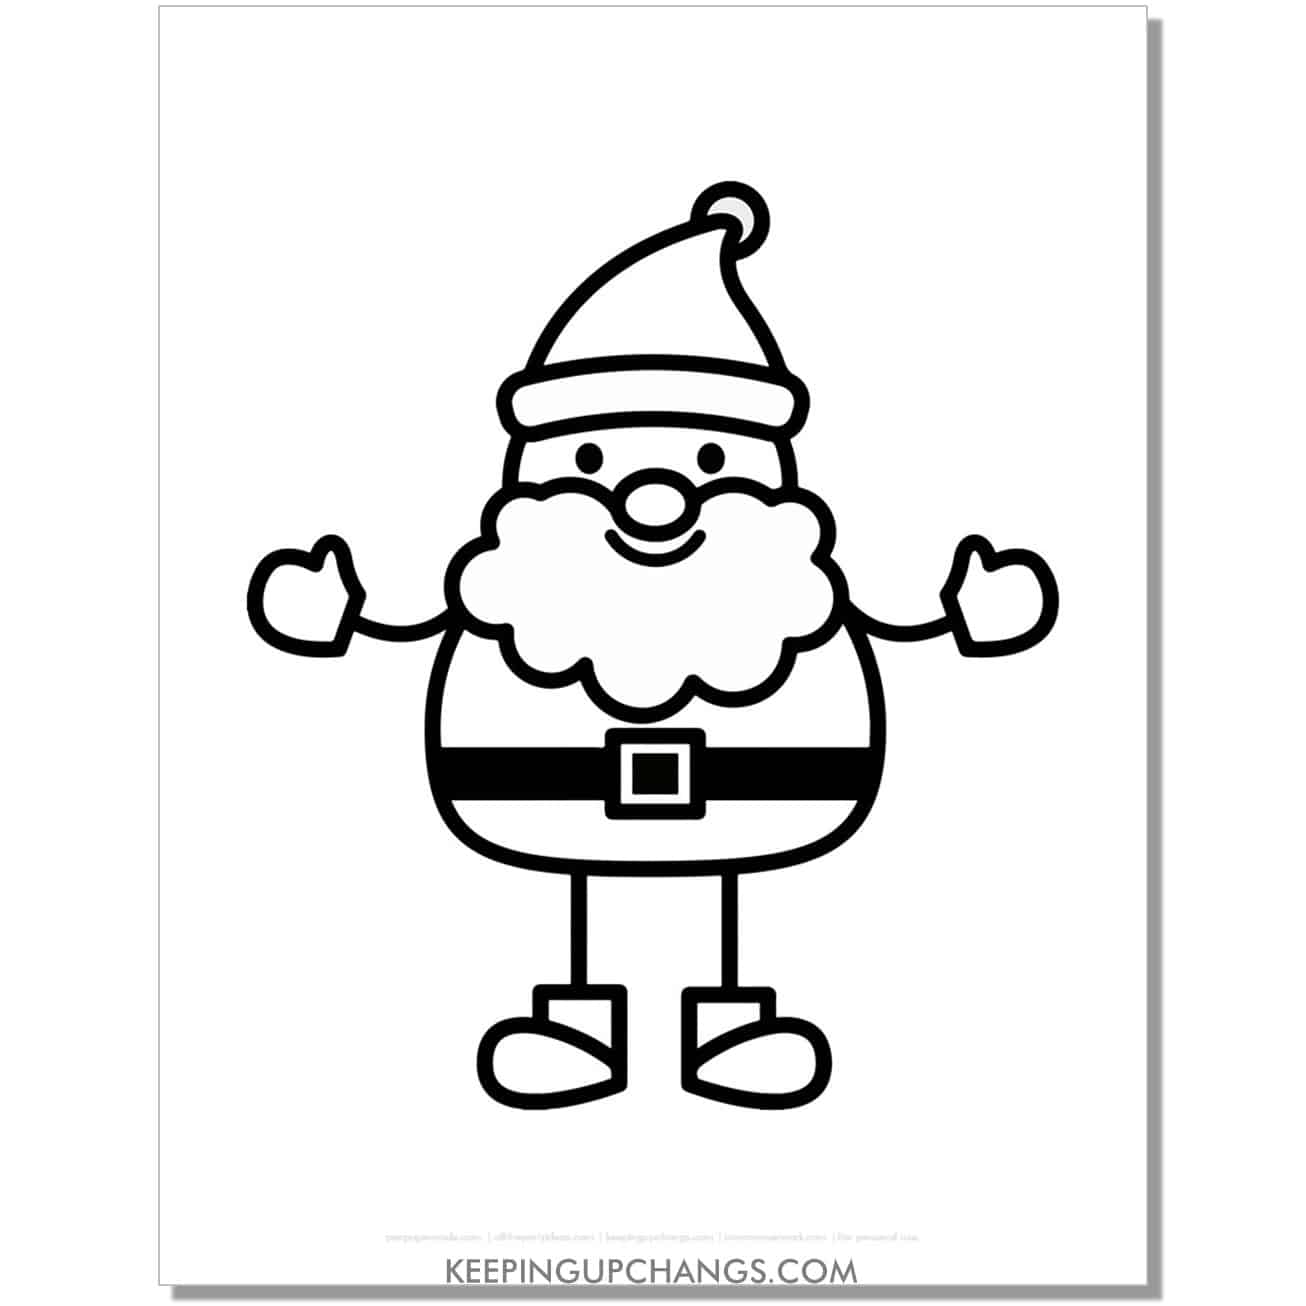 free easy, simple line art santa outline, black and white cut out template.